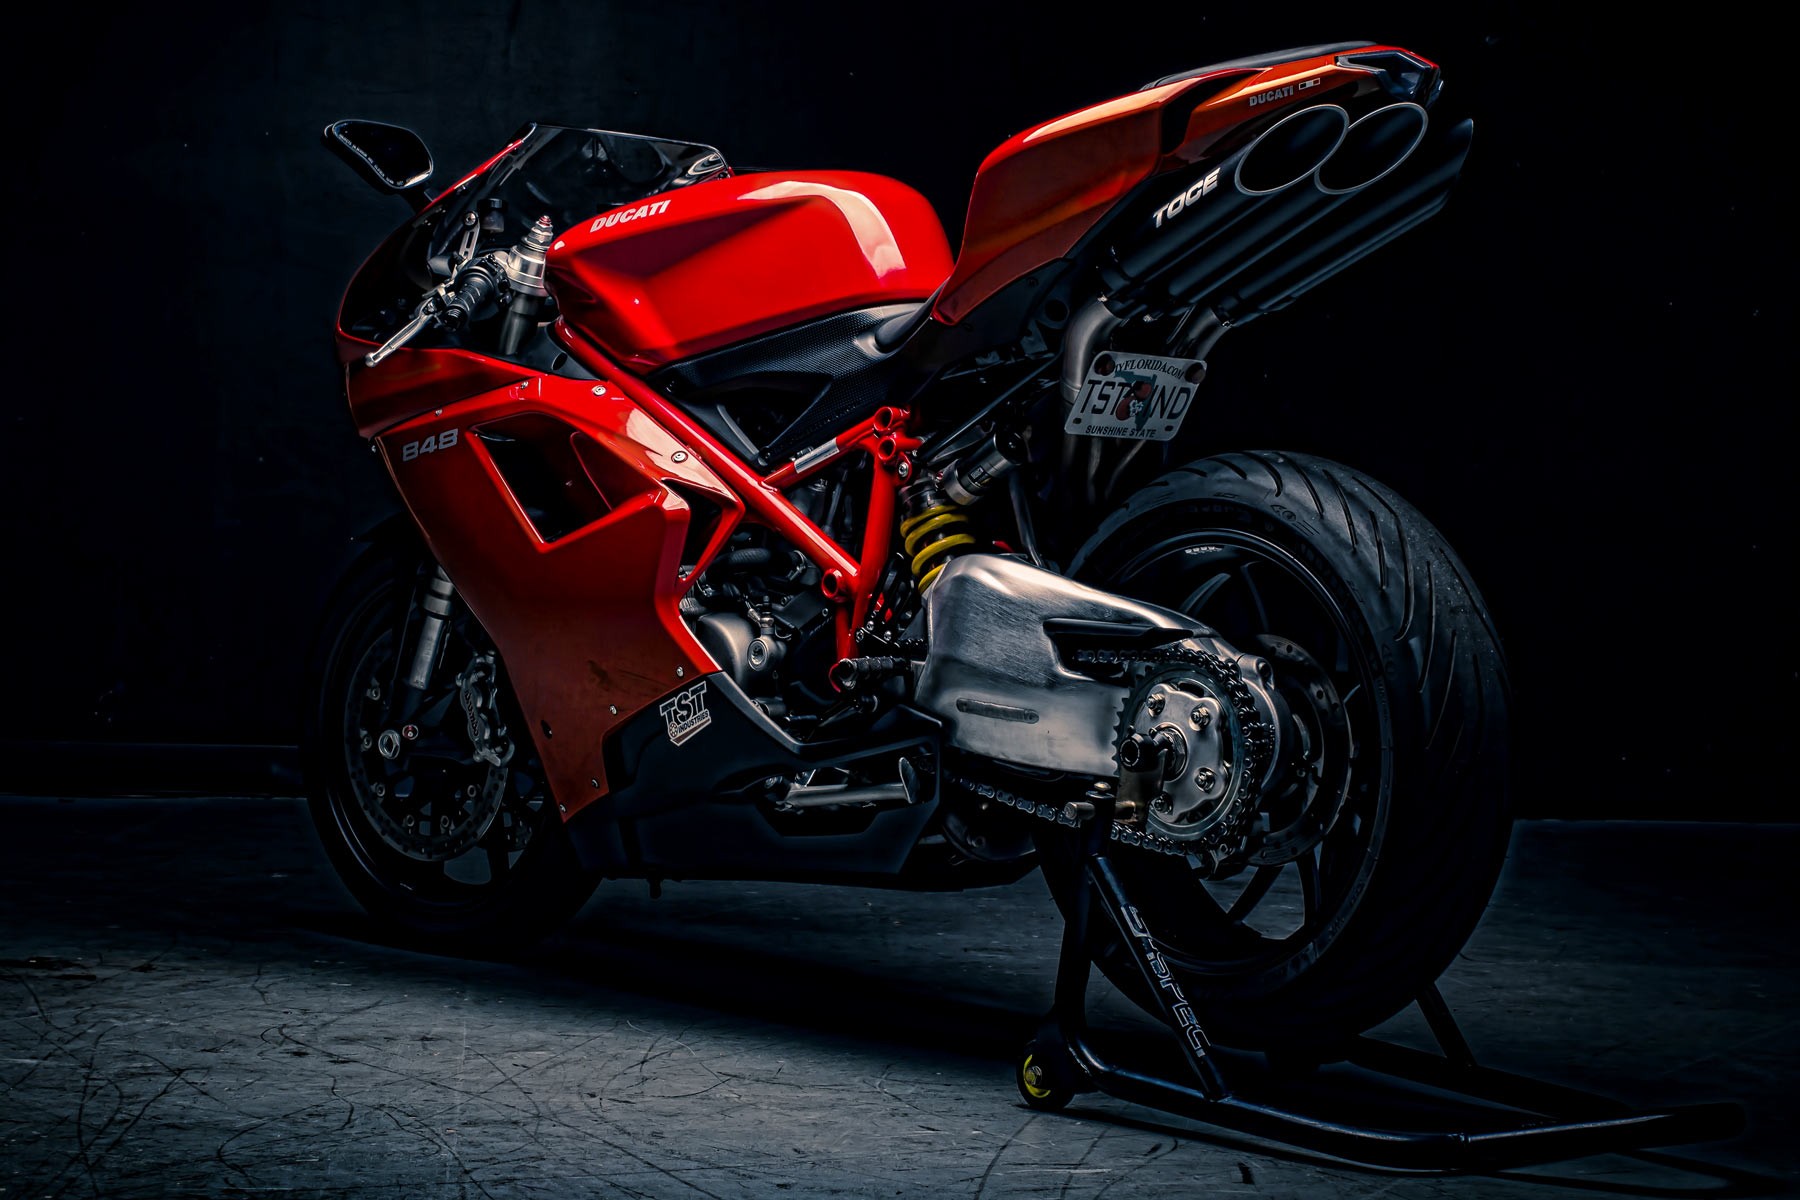 Professional photoshoot of a Ducati 848 performed by TST s own Director of graphy Marc